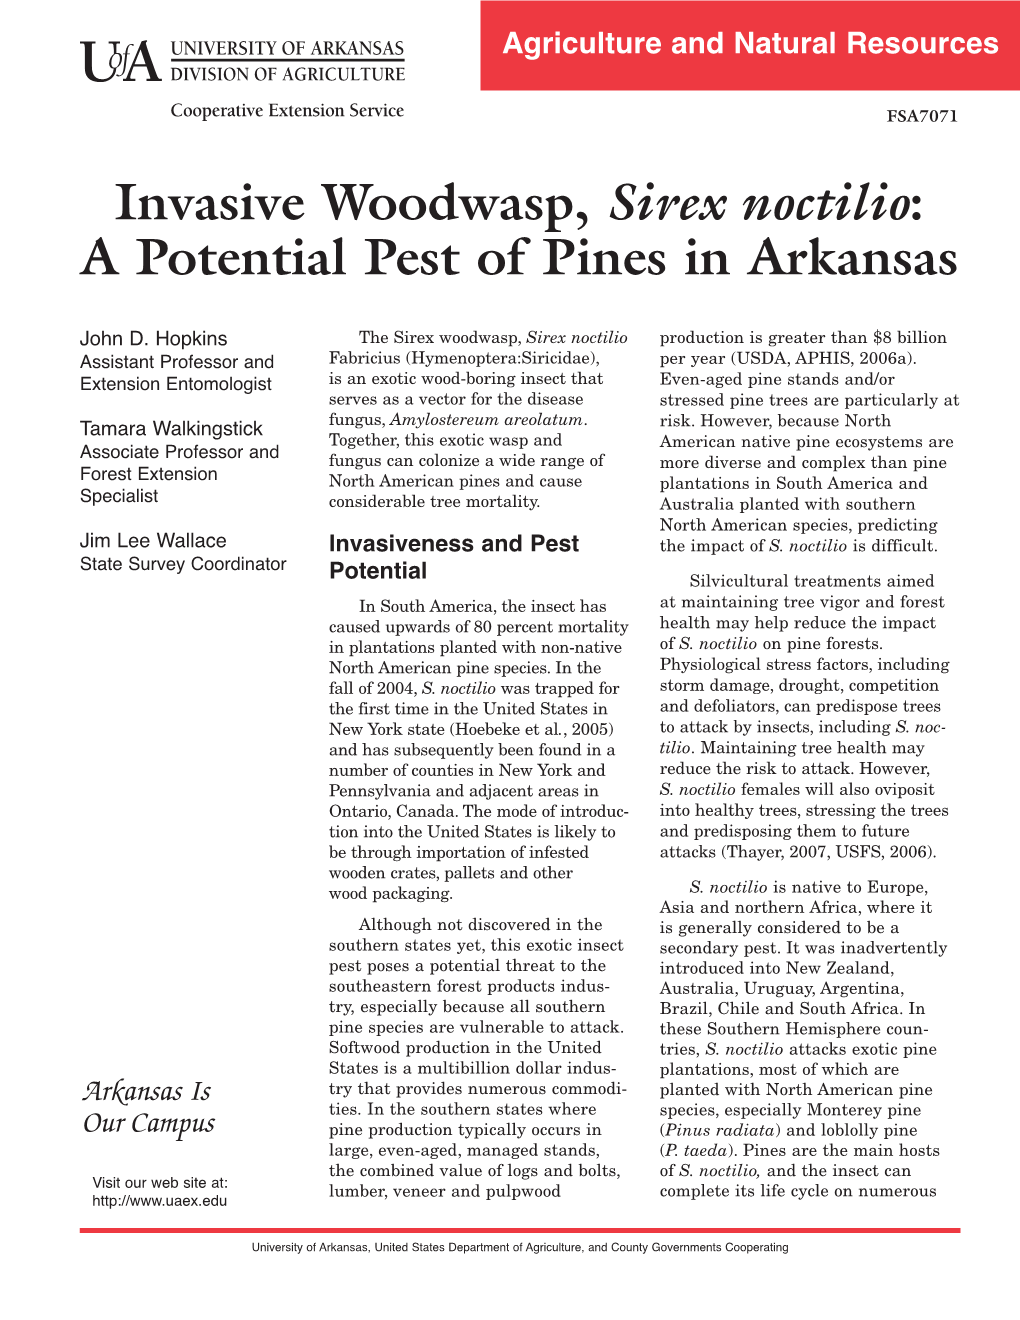 Invasive Woodwasp, Sirex Noctilio: a Potential Pest of Pines in Arkansas